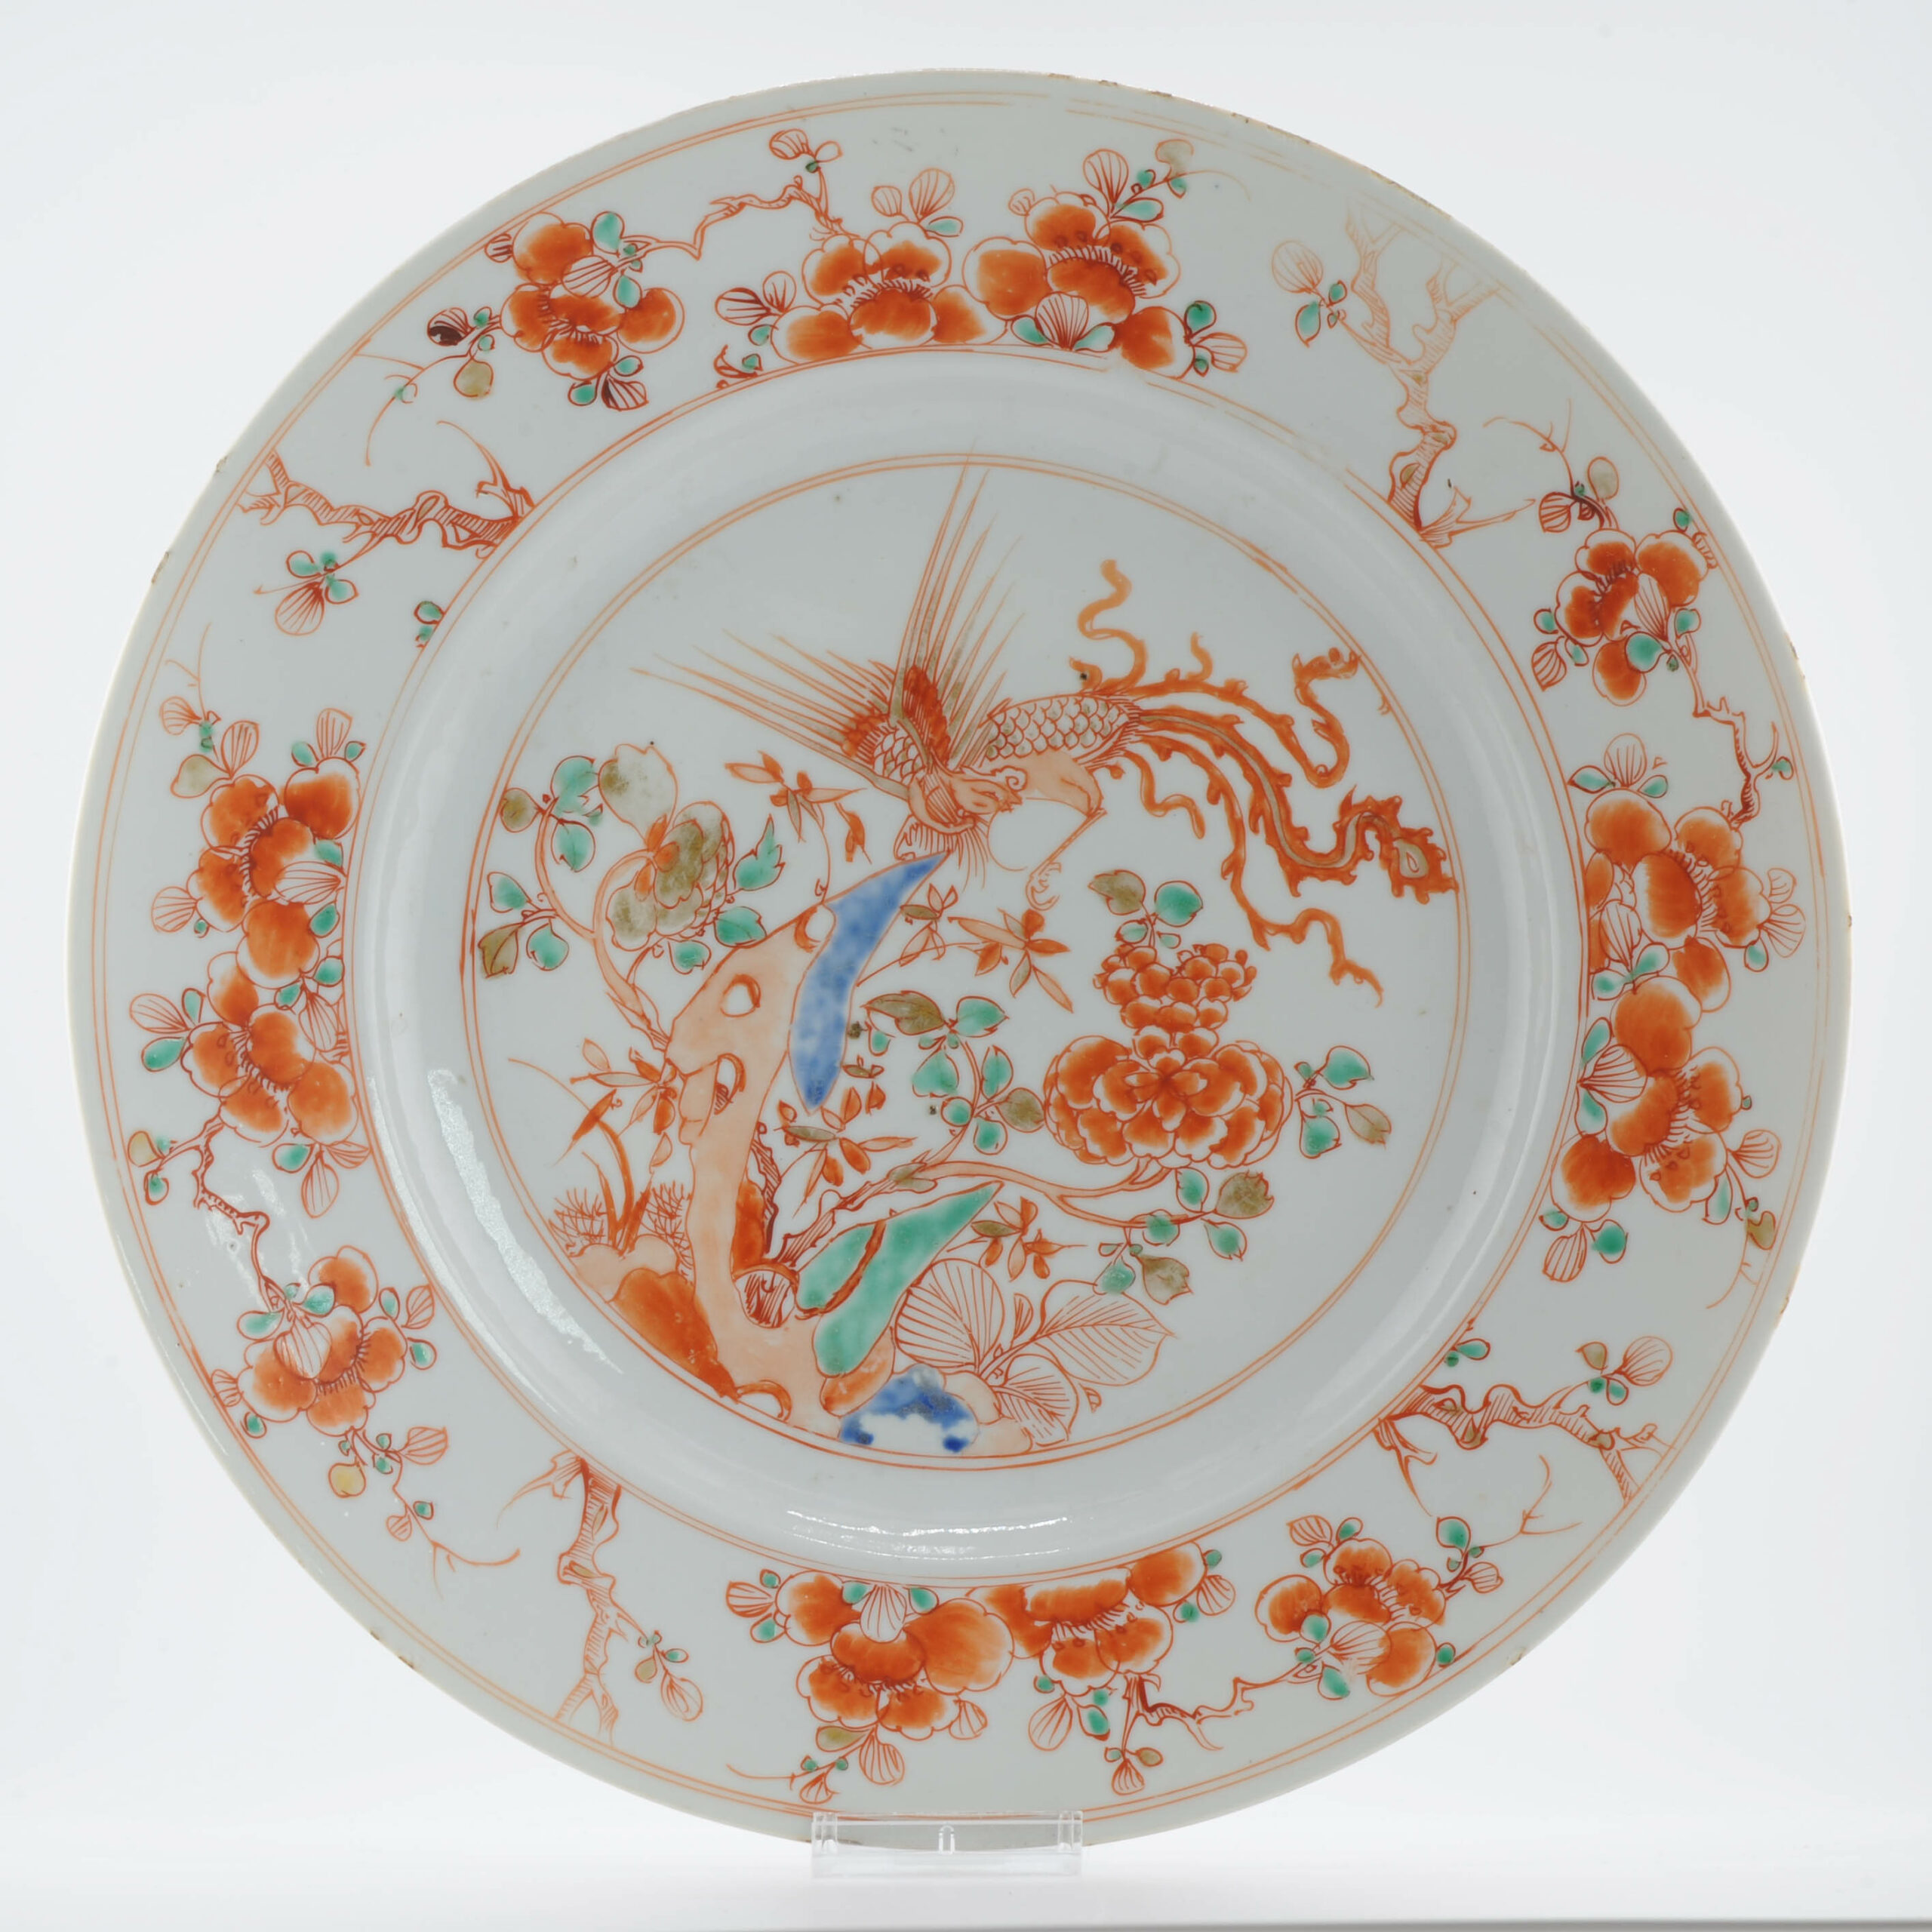 1350 Antique Chinese 1720-1740 Plate. Redecorated in the Netherlands. Johanneum Mark